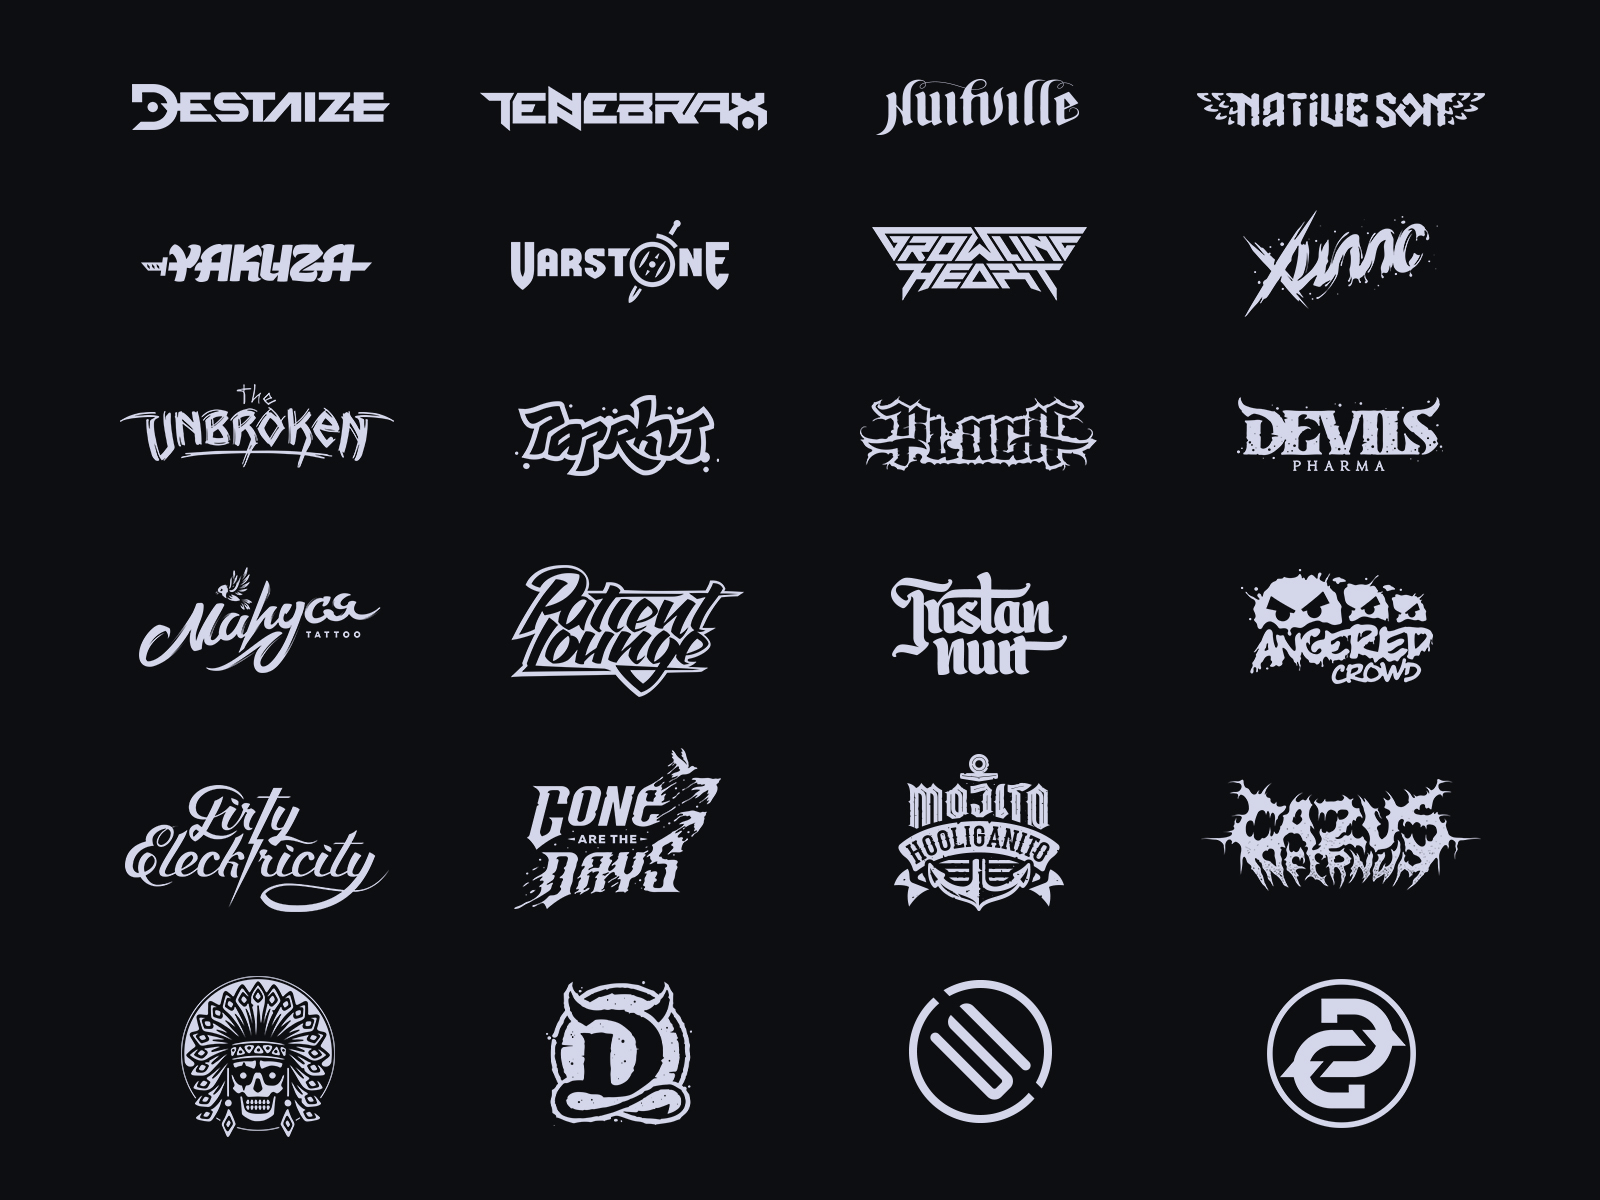 Selected logos (2018) by Tristan Nuit on Dribbble